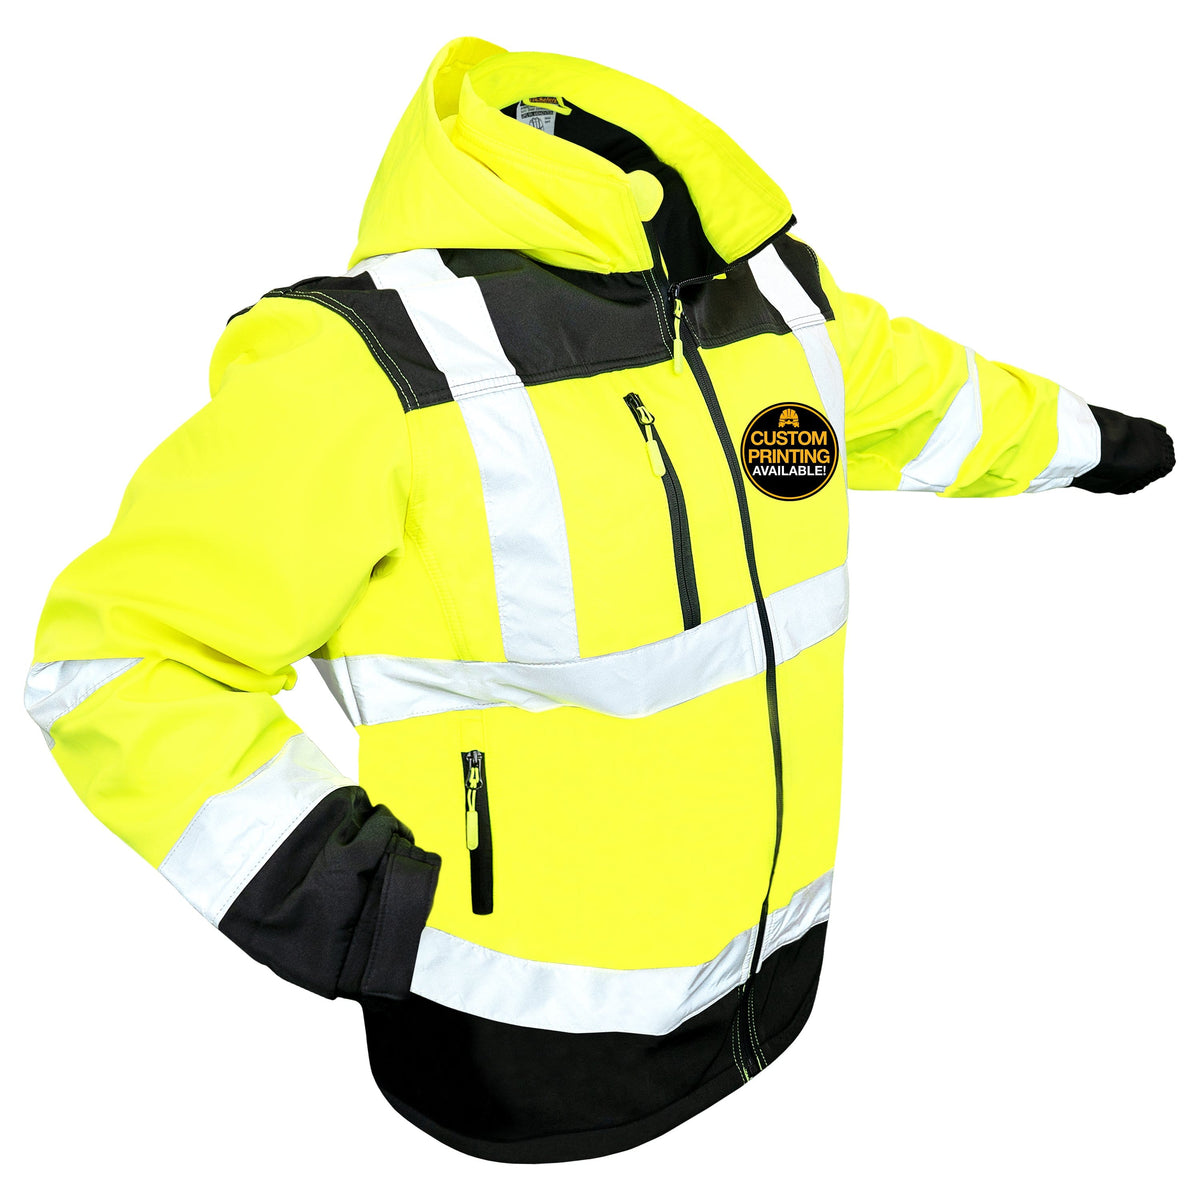 Jacket Class KwikSafety AGENT HOOD) ANS (DETACHABLE Softshell Safety 3